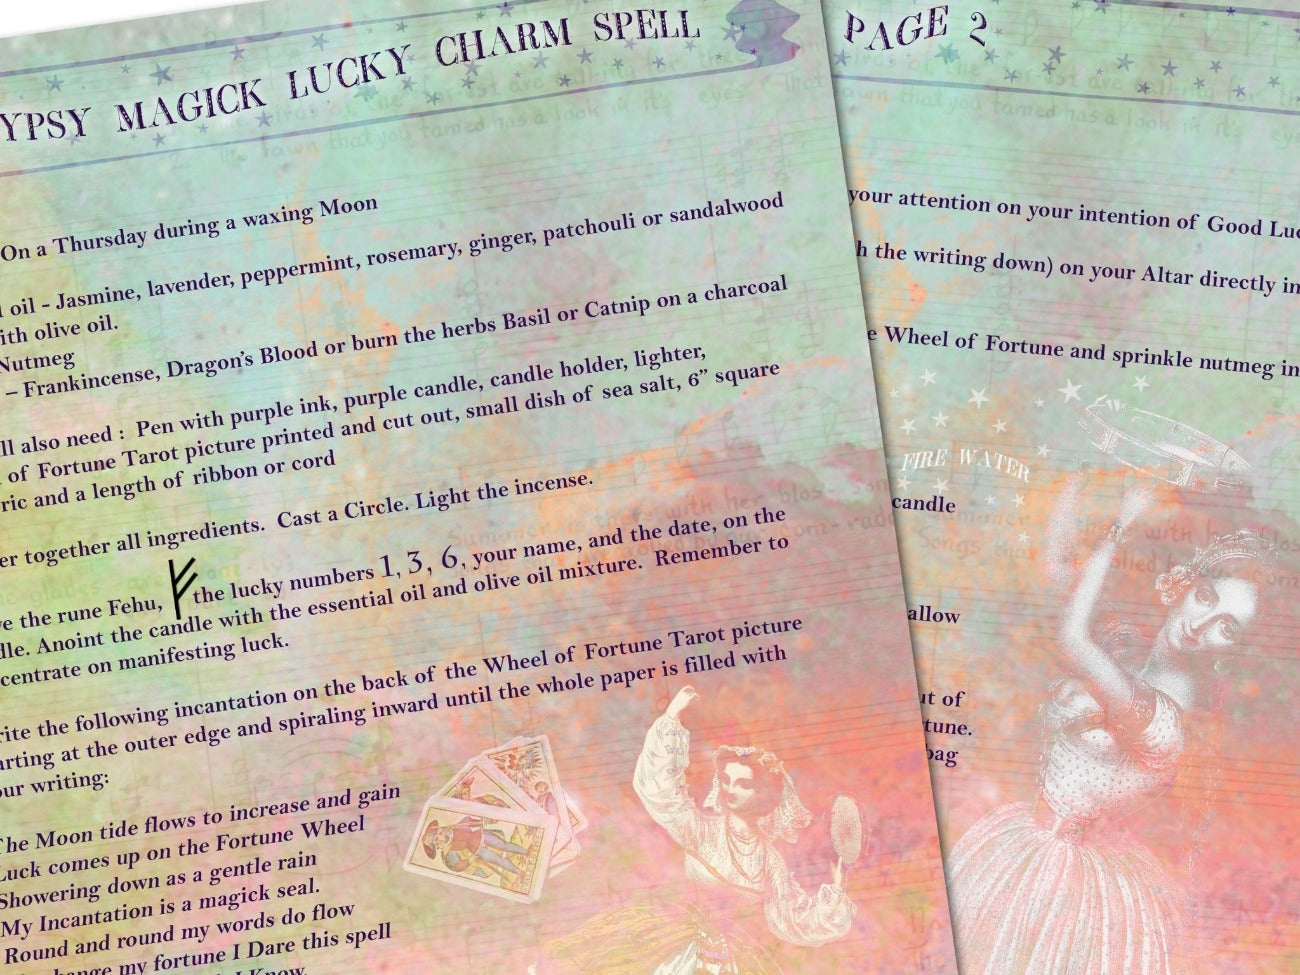 GYPSY MAGICK, Lucky Charm Spell, Gypsy Witchcraft, Romani Magic,  Fortune Teller Spell - Morgana Magick Spell